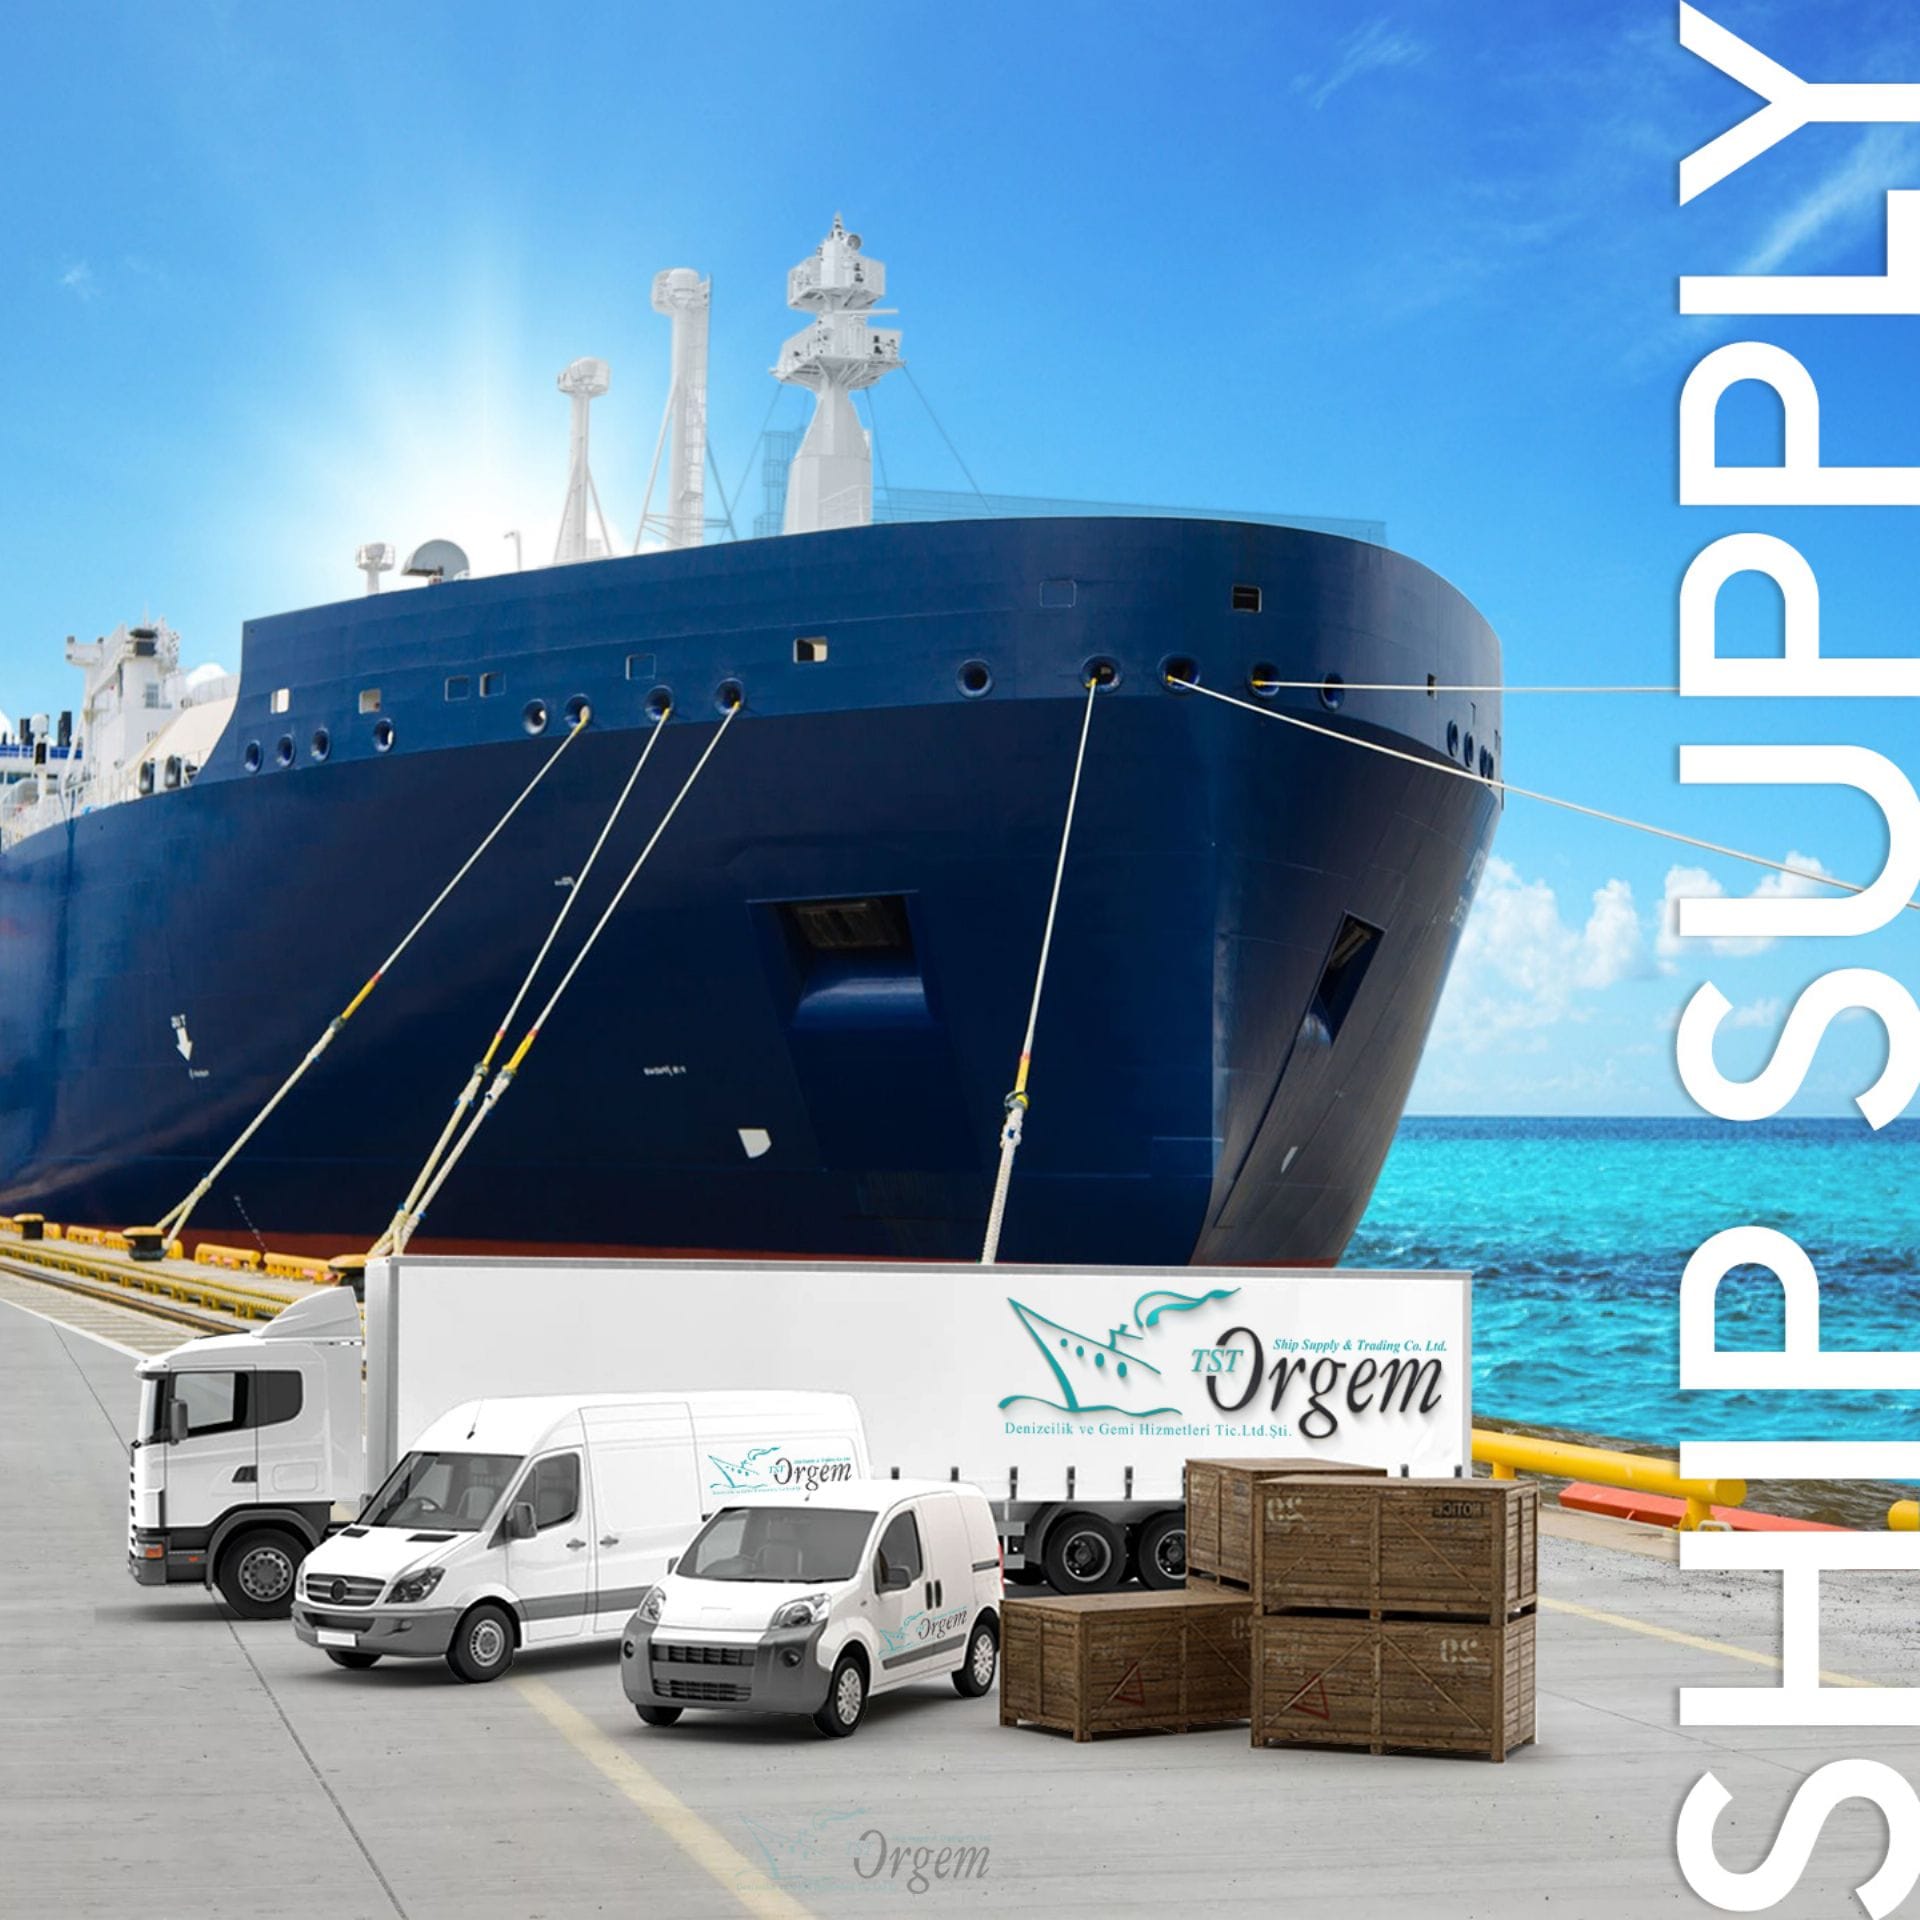 TST Orgem Ship Provision Supply from Istanbul to the World!